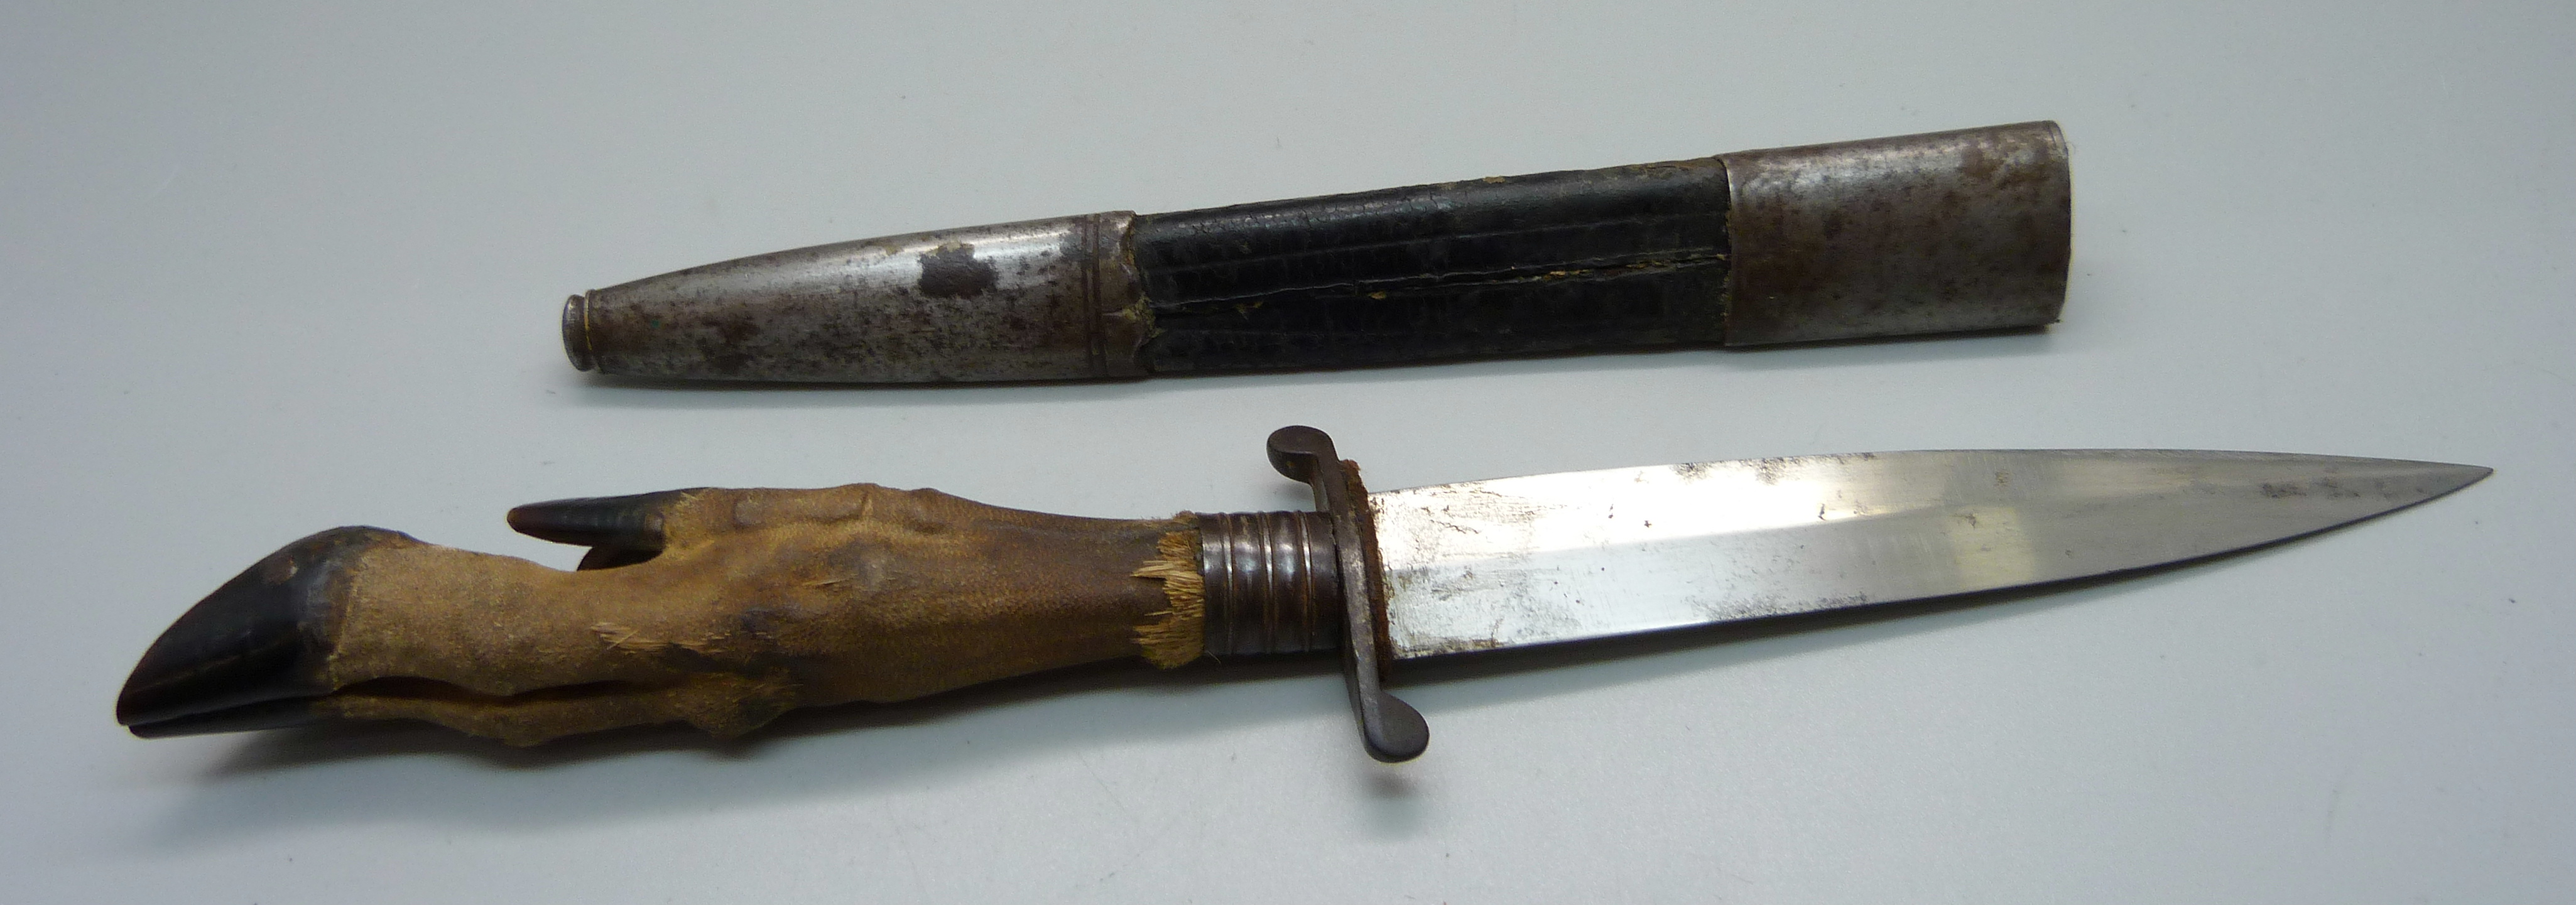 A German WWI trench knife with scabbard - Image 3 of 3